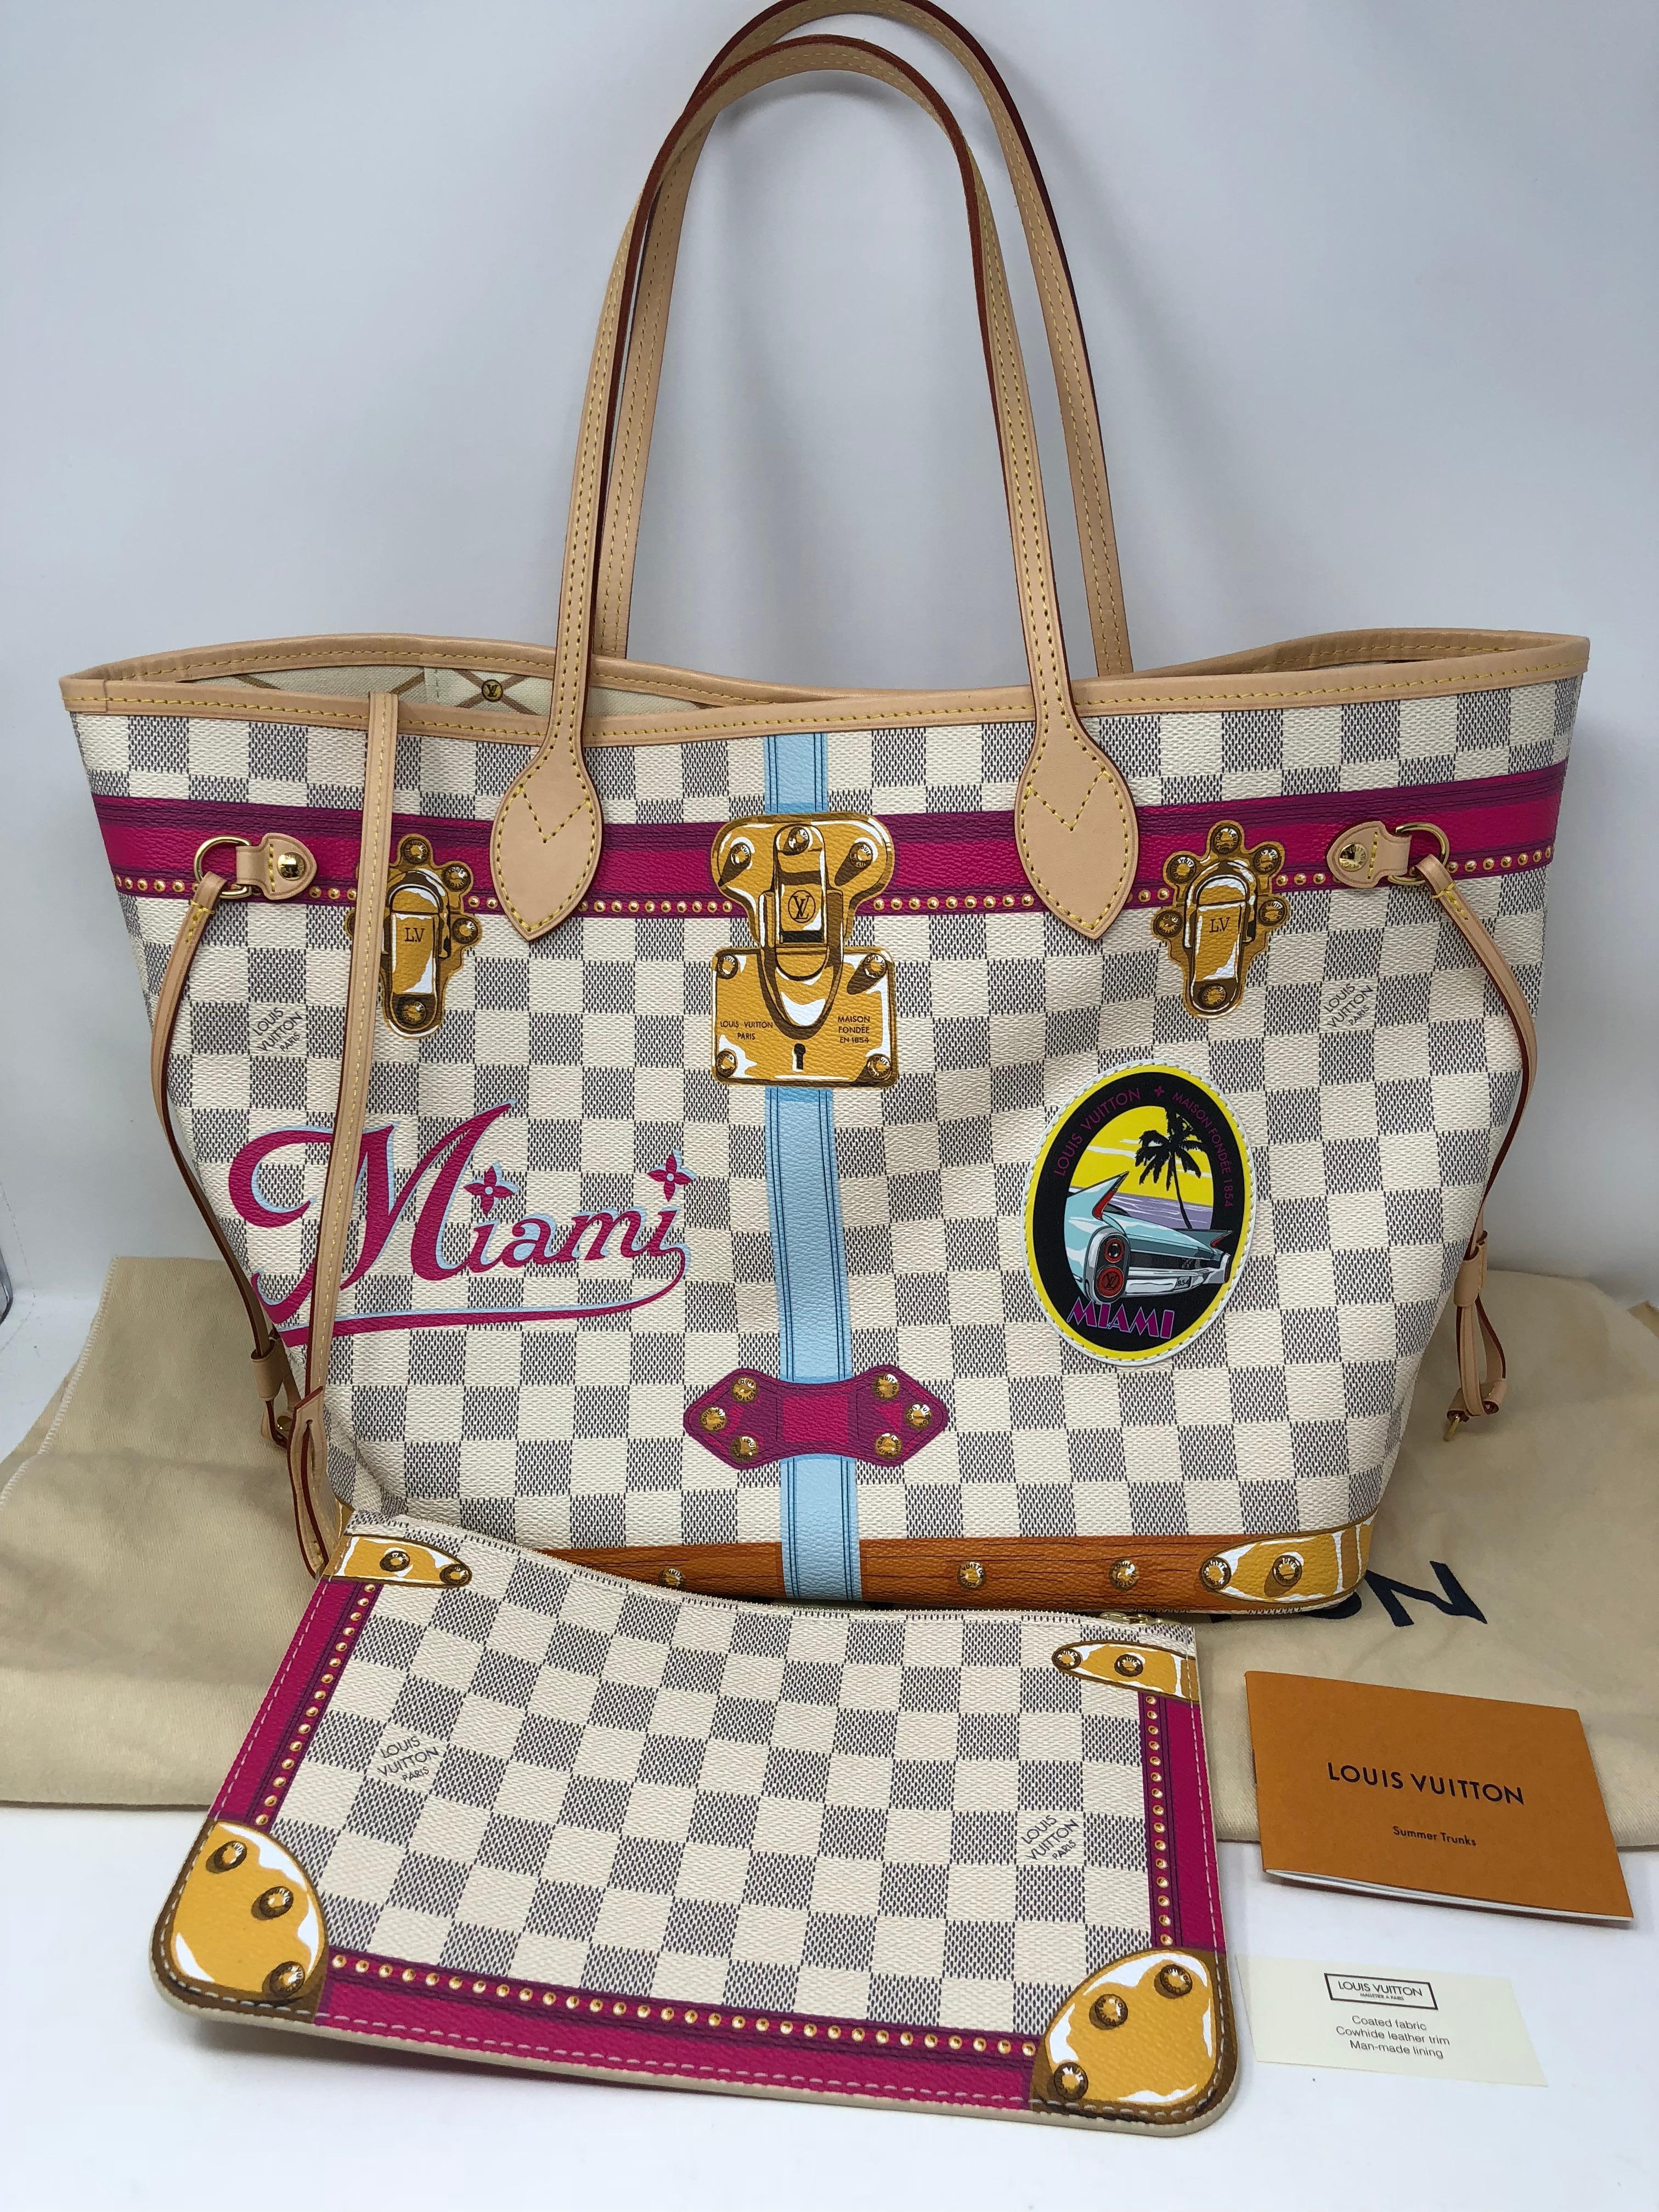 Louis Vuitton Special Trunks Collection 2018 with Miami logo in Damier Azure. Made only for the Miami market so very limited. This Neverfull MM includes the detachable pochette. Brand new and sold out. Includes dust cover and box. Guaranteed